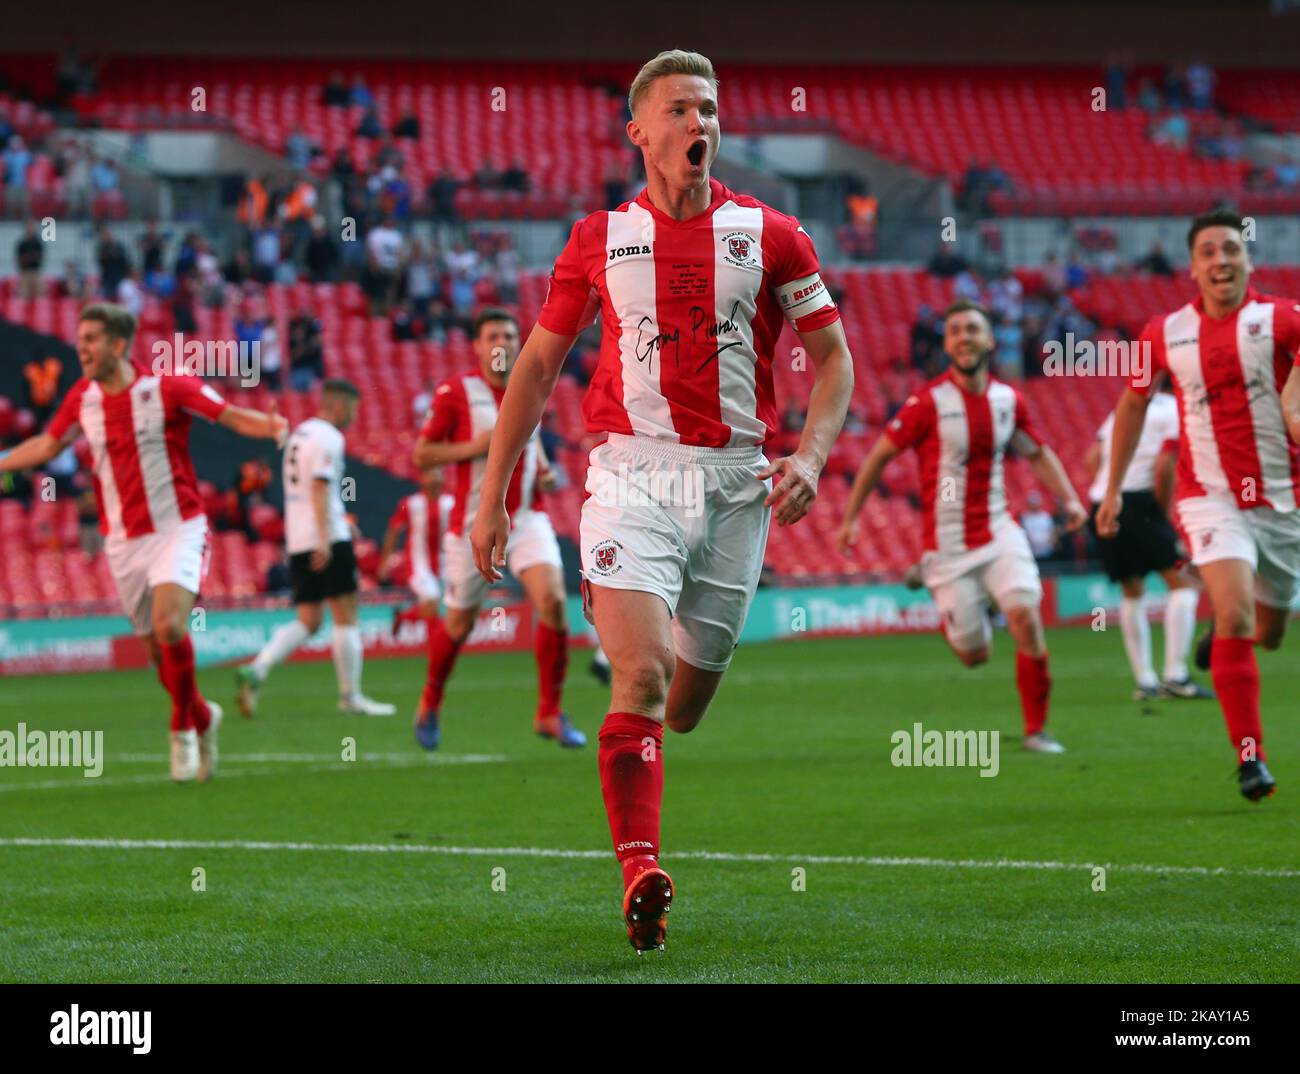 Gareth (Gaz) Dean of Brackley Town celebrates scoring his sides first goal during The Buildbase FA Trophy Final match between Brackley Town and Bromley at Wembley, London, England on 20 May 2018. (Photo by Kieran Galvin/NurPhoto) Stock Photo